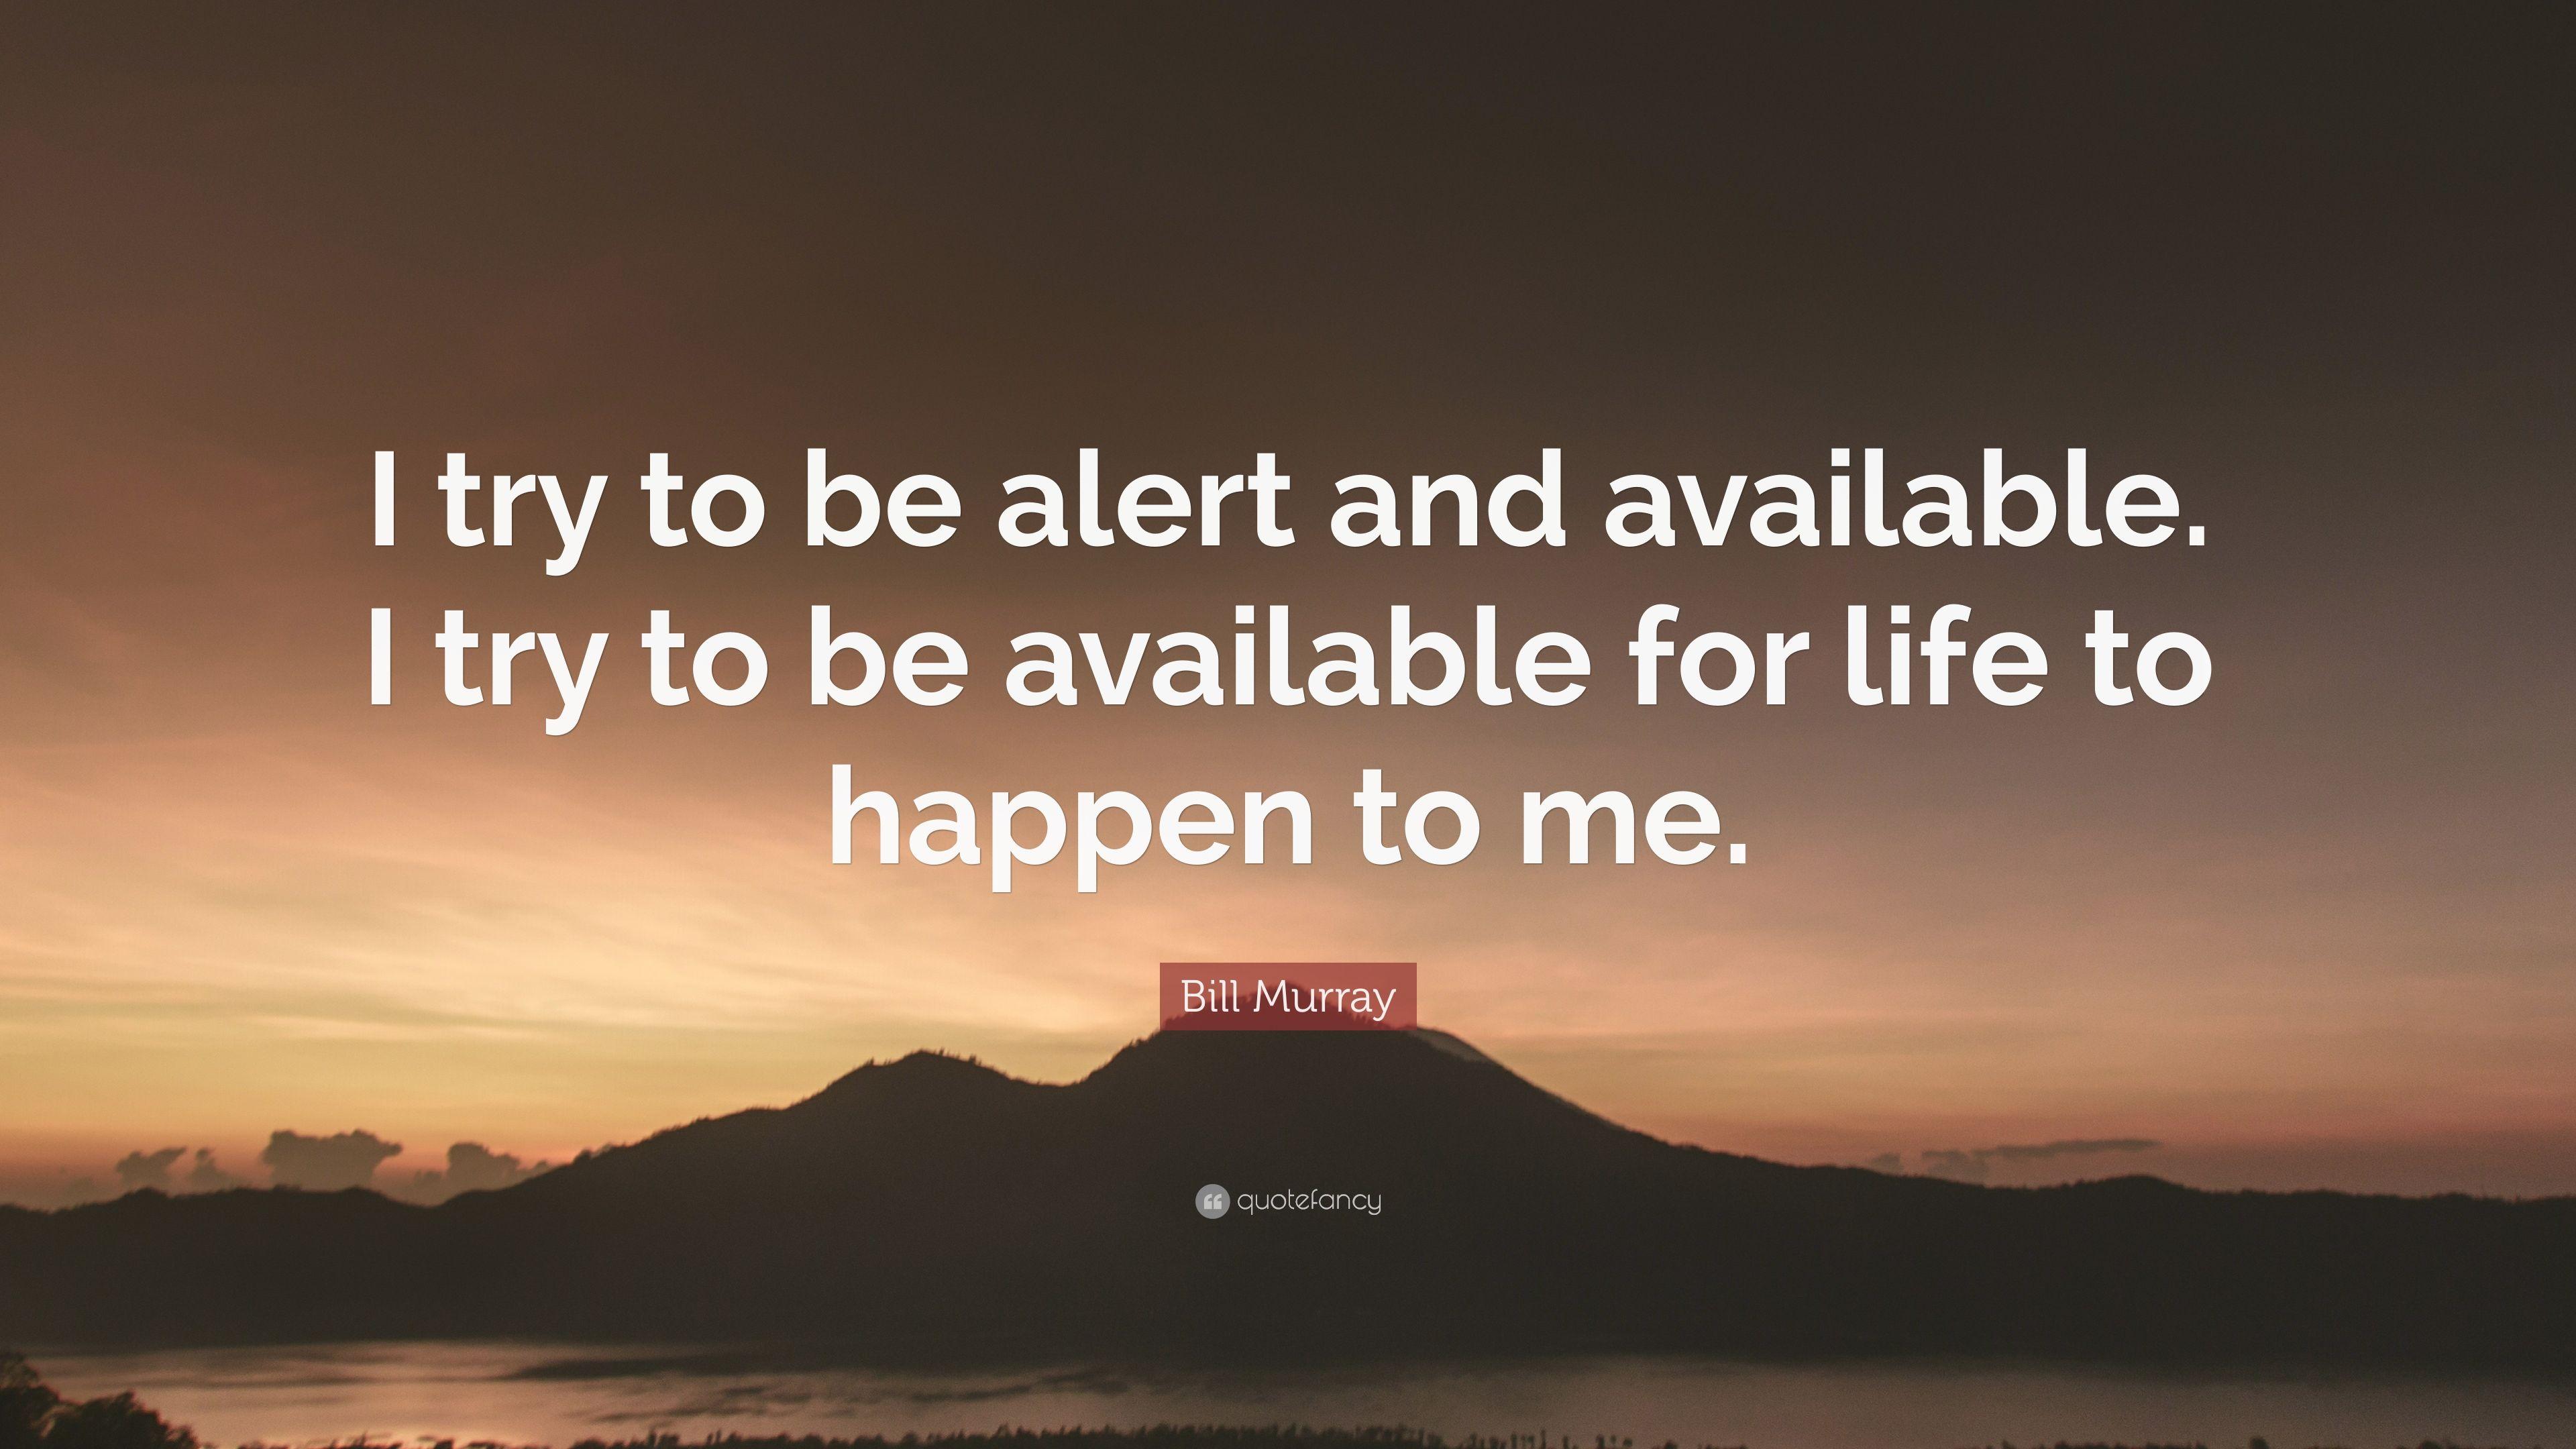 Bill Murray Quote: “I try to be alert and available. I try to be